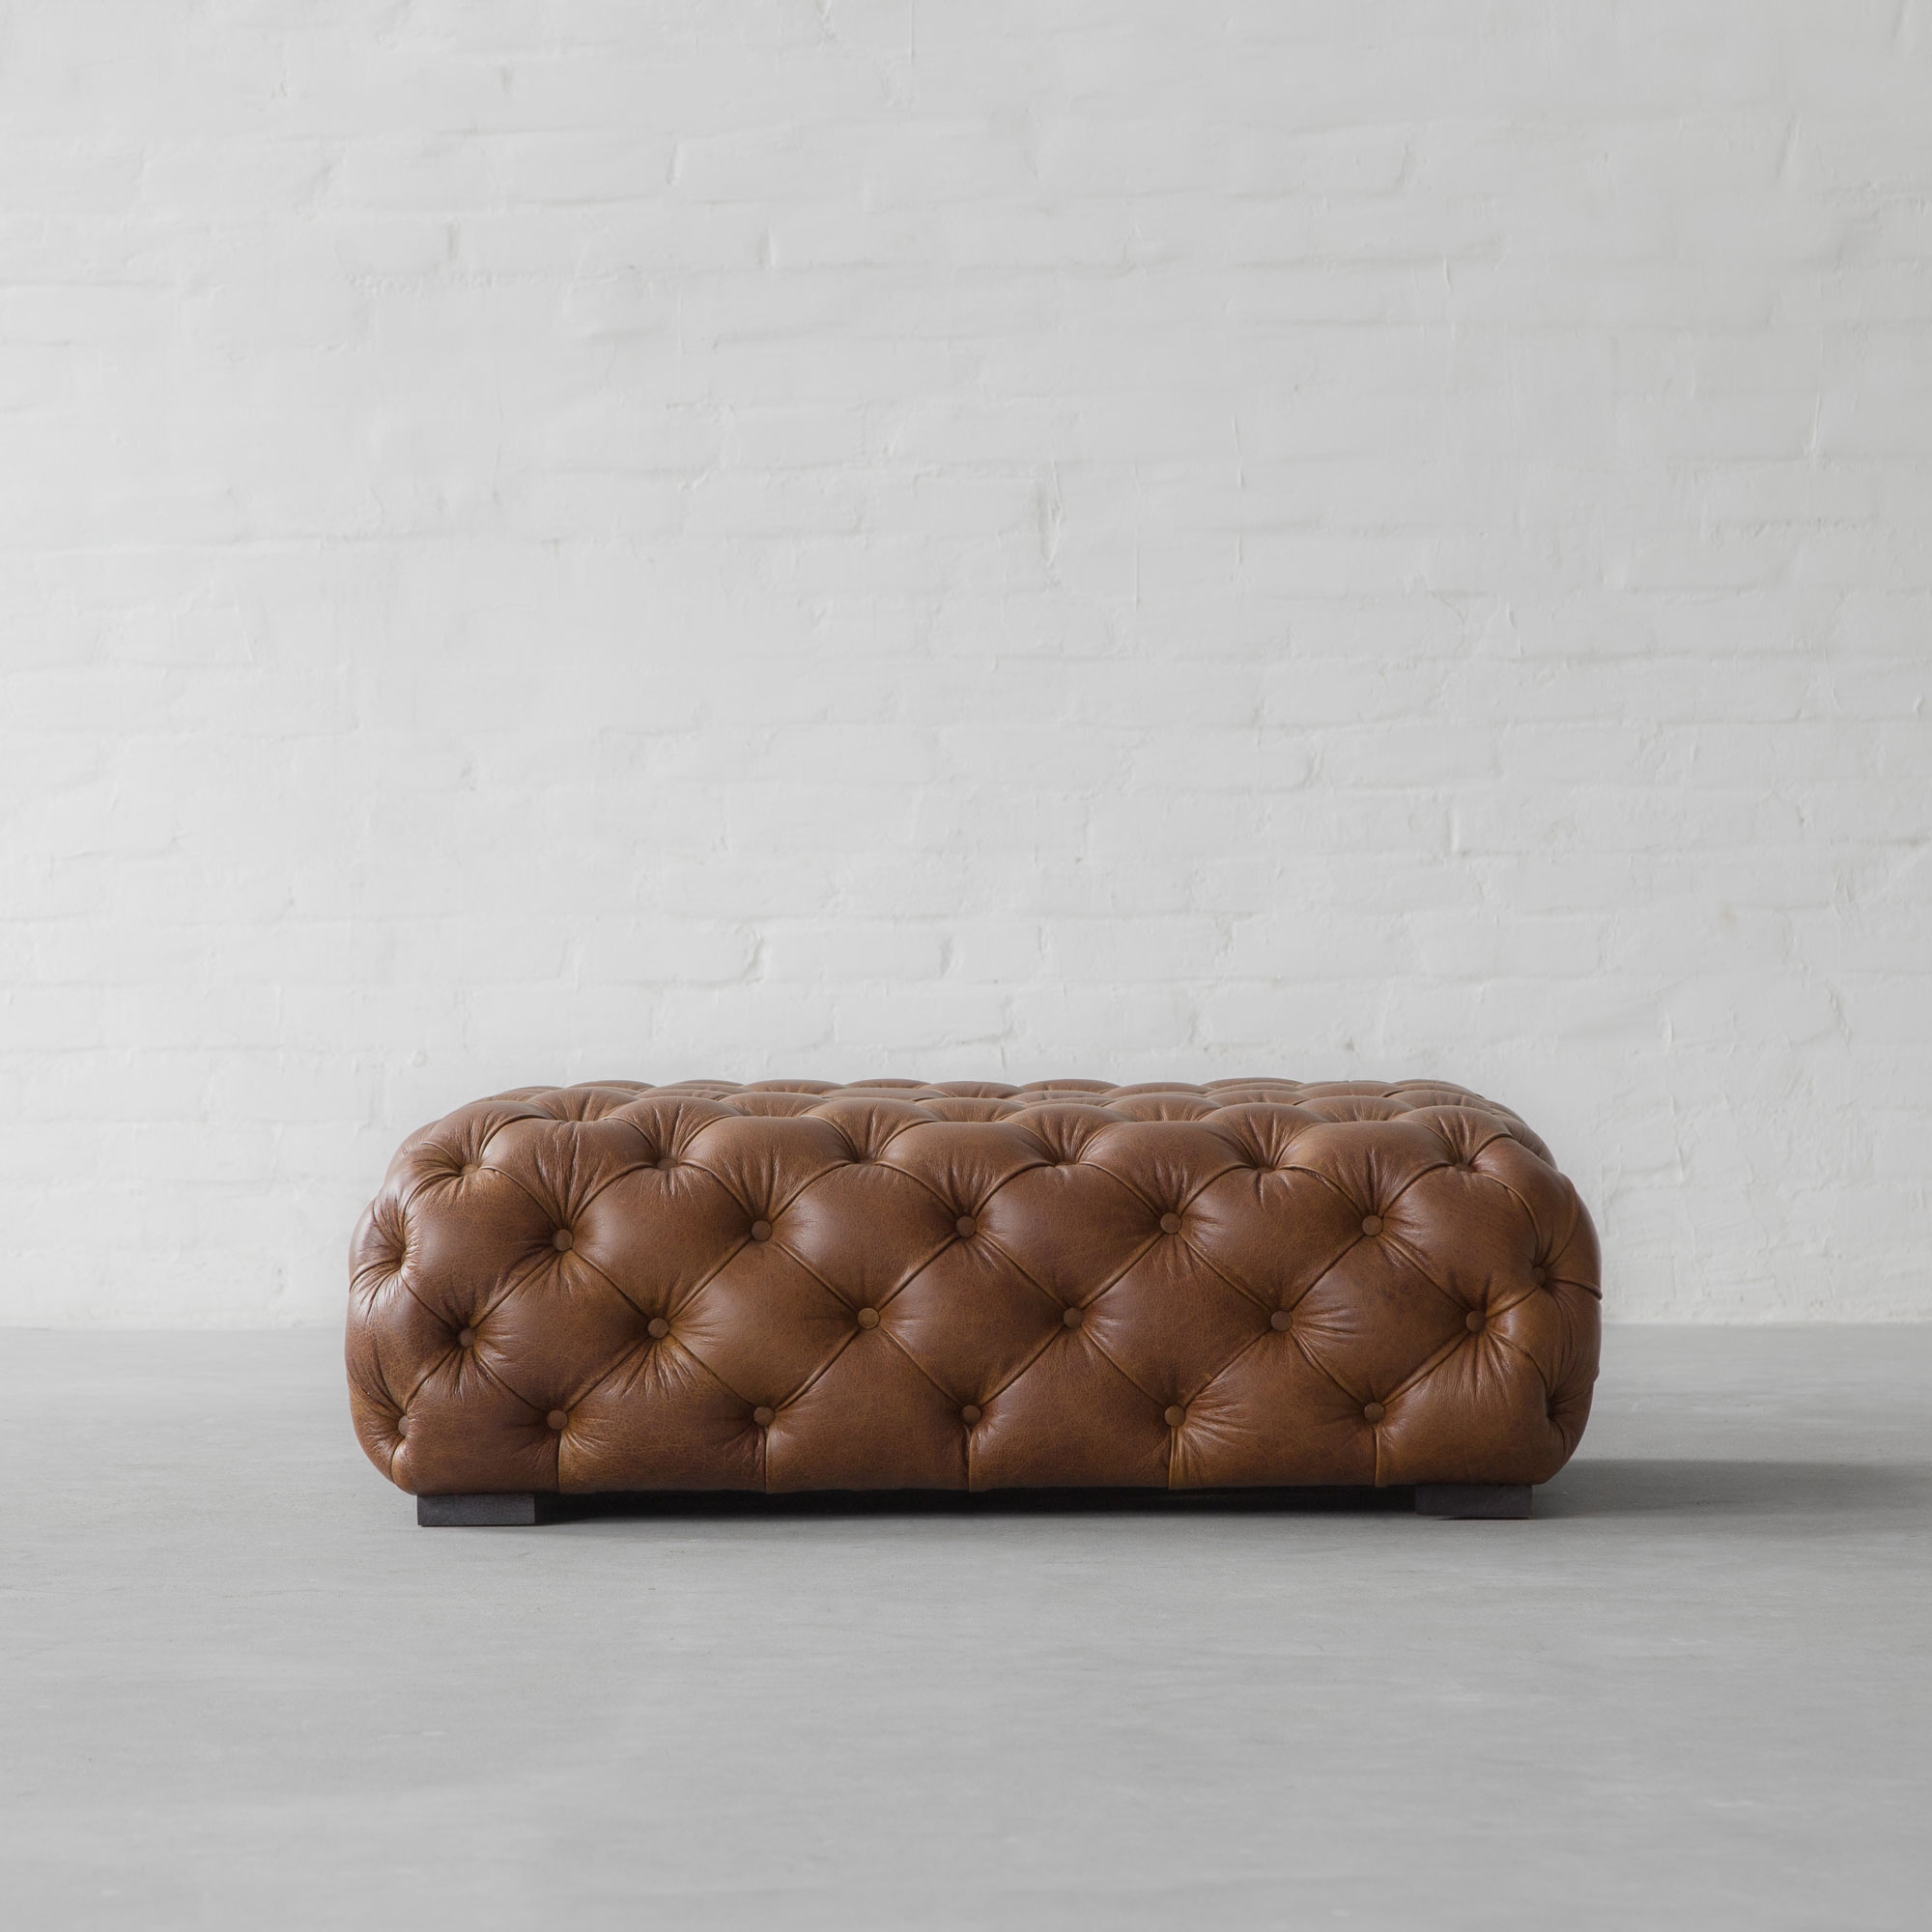 Birmingham Tufted Leather Coffee Table, Leather Coffe Table